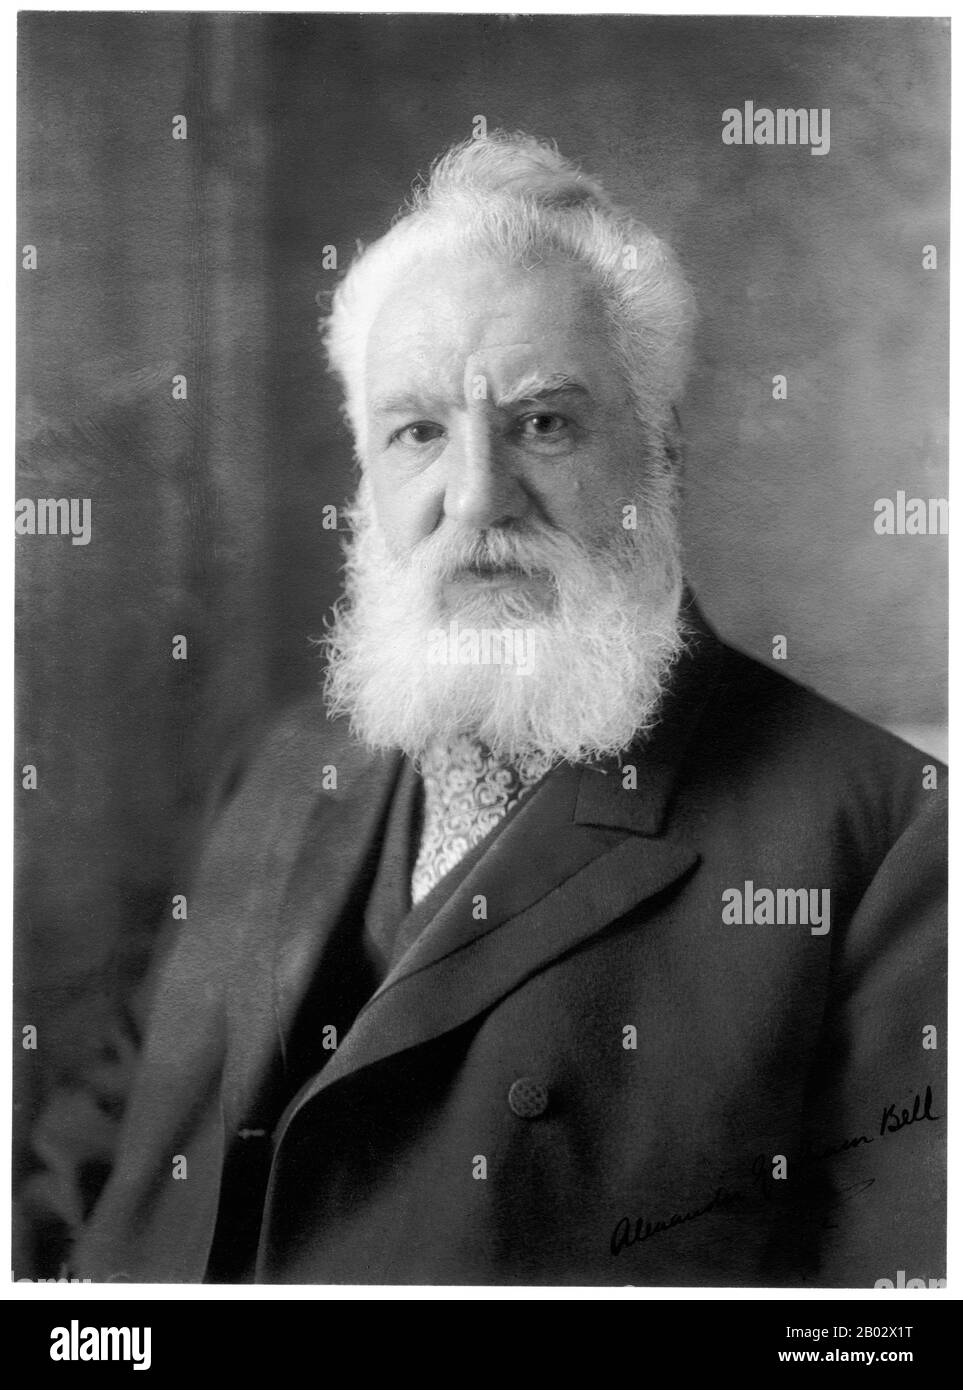 Alexander Graham Bell (March 3, 1847 – August 2, 1922) was an eminent Scottish-born scientist, inventor, engineer and innovator who is credited with inventing the first practical telephone.  Bell's father, grandfather, and brother had all been associated with work on elocution and speech, and both his mother and wife were deaf, profoundly influencing Bell's life's work. His research on hearing and speech further led him to experiment with hearing devices which eventually culminated in Bell being awarded the first U.S. patent for the telephone in 1876. Bell considered his most famous invention Stock Photo